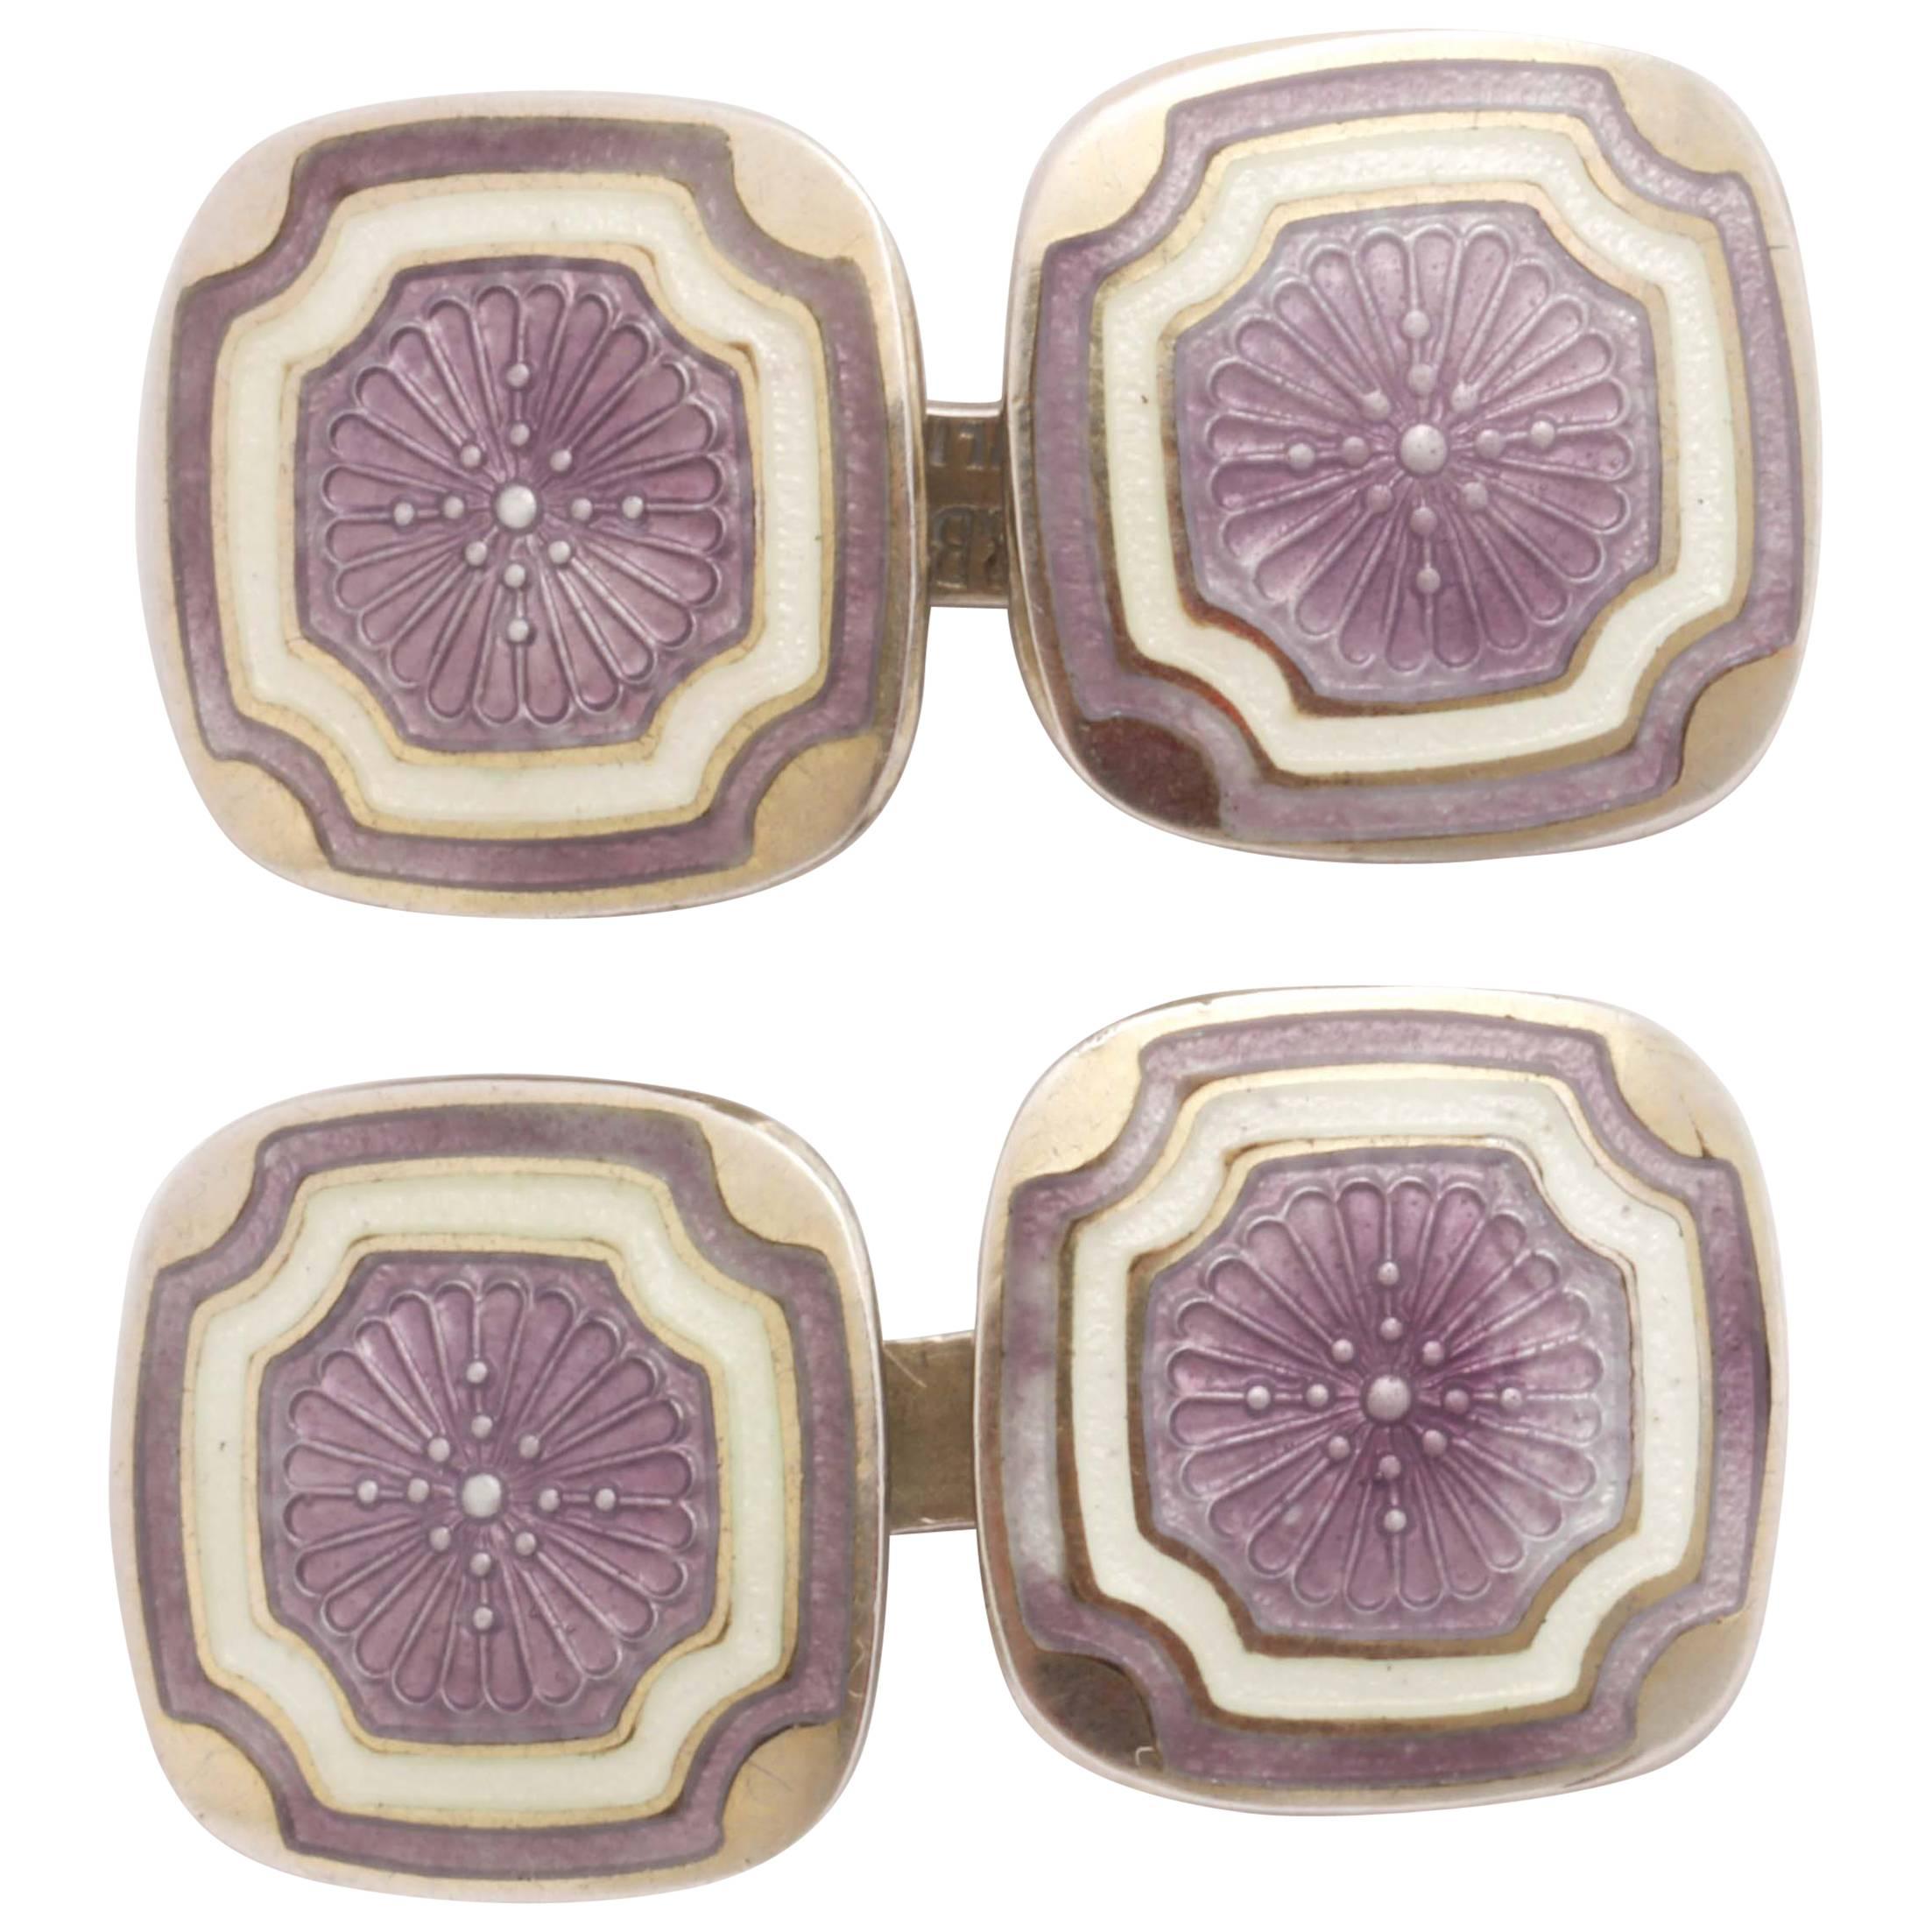 Foster & Bailey Co. American Art Deco Silver and Guilloche Enamel Cufflinks im Angebot